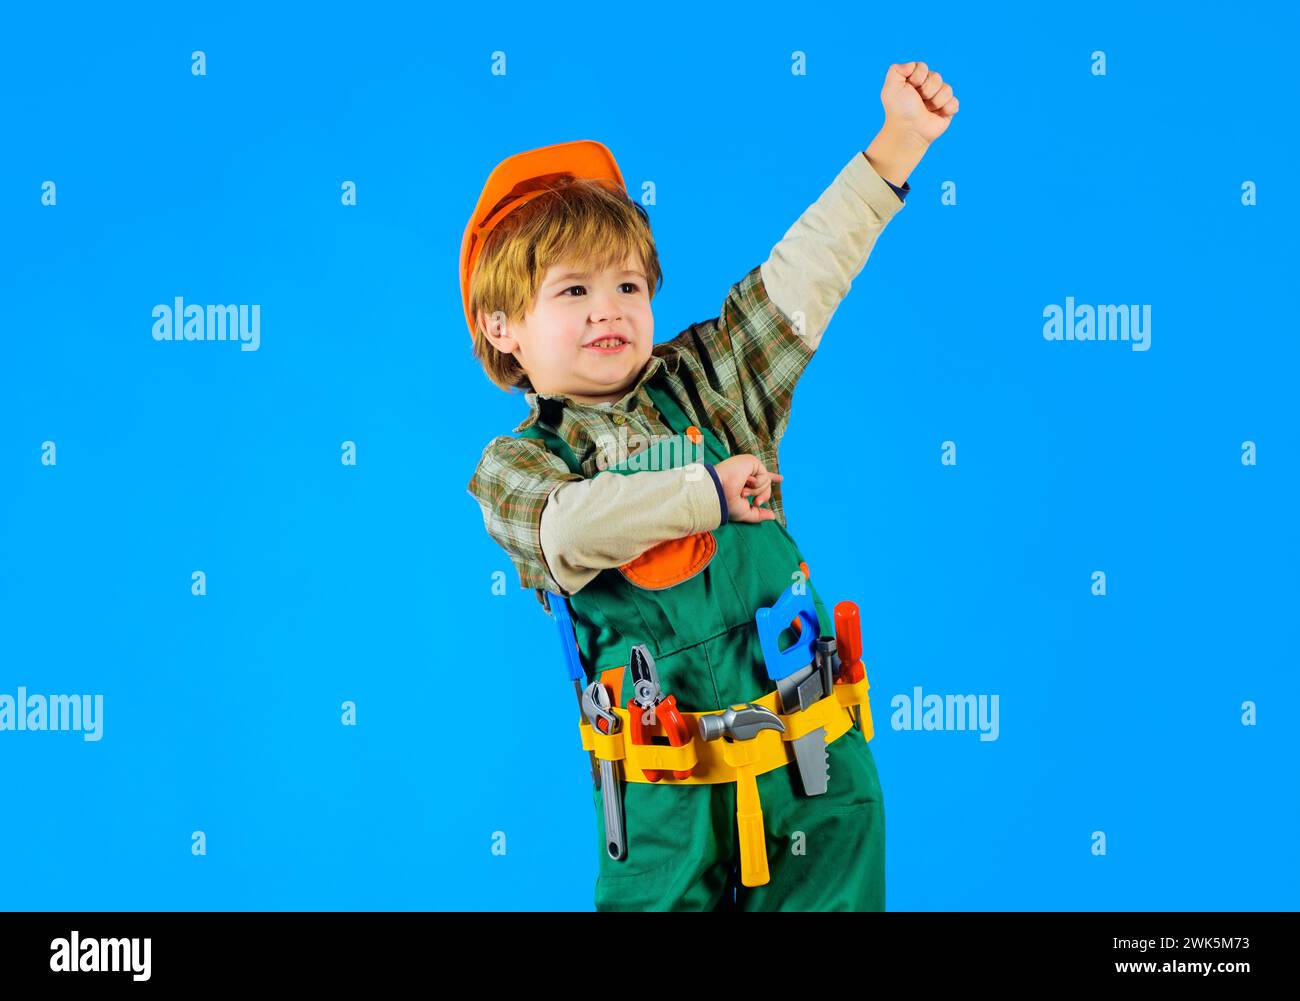 Little child in builders uniform and hard hat with toy tools. Kid playing with repair tools. Cute boy with toolbelt of tools for building. Kid Stock Photo